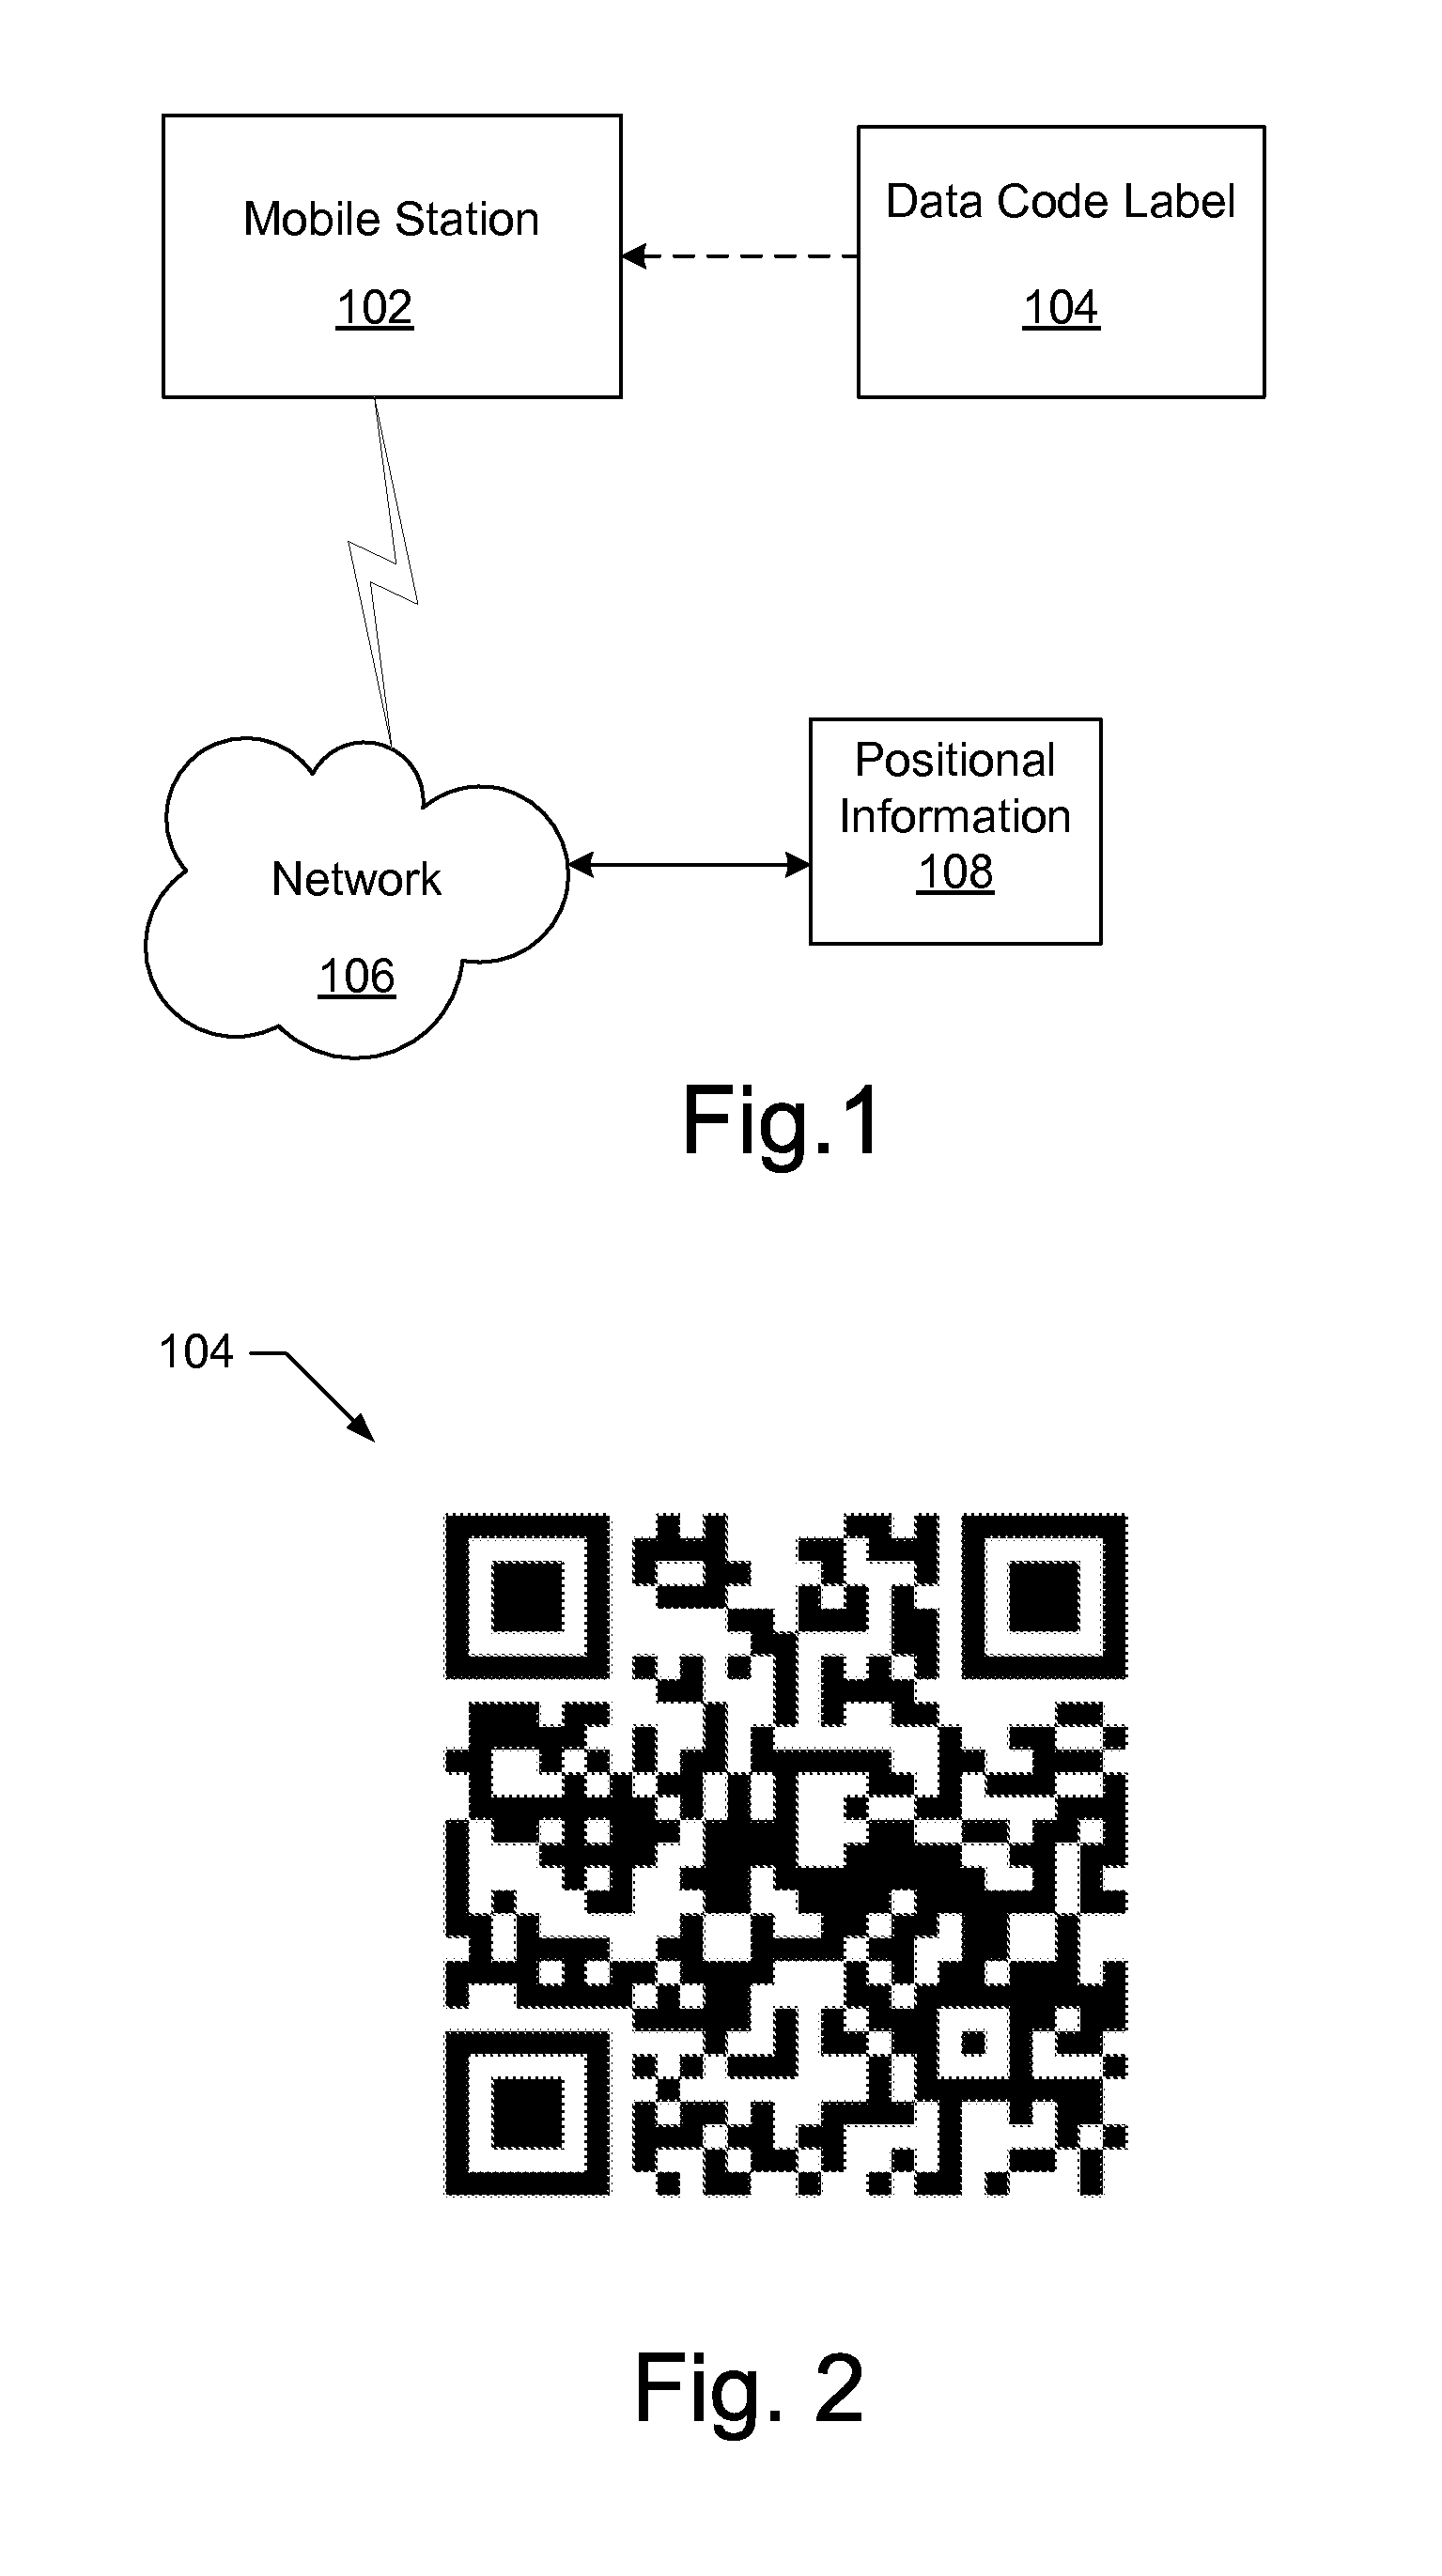 Accessing positional information for a mobile station using a data code label